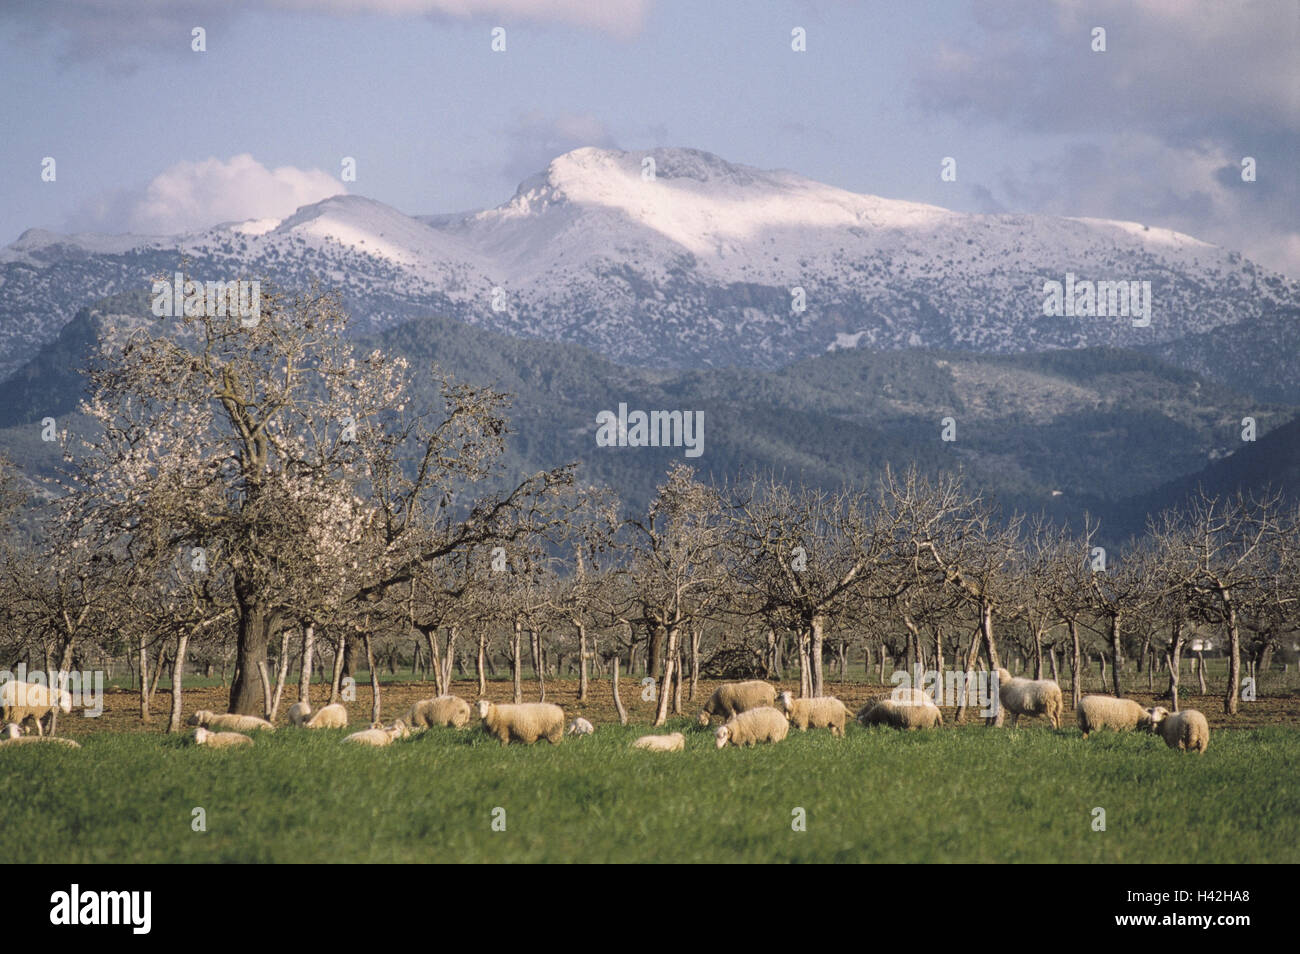 Spain, Majorca, Binissalem, scenery, almond trees, blossom, put out to pasture meadow, sheep, the Mediterranean Sea, the Balearic Islands, island, cultivation, fruit-trees, trees, fruit blossom, almond blossom, Schafweide, pasture, flock of sheep, benefit Stock Photo